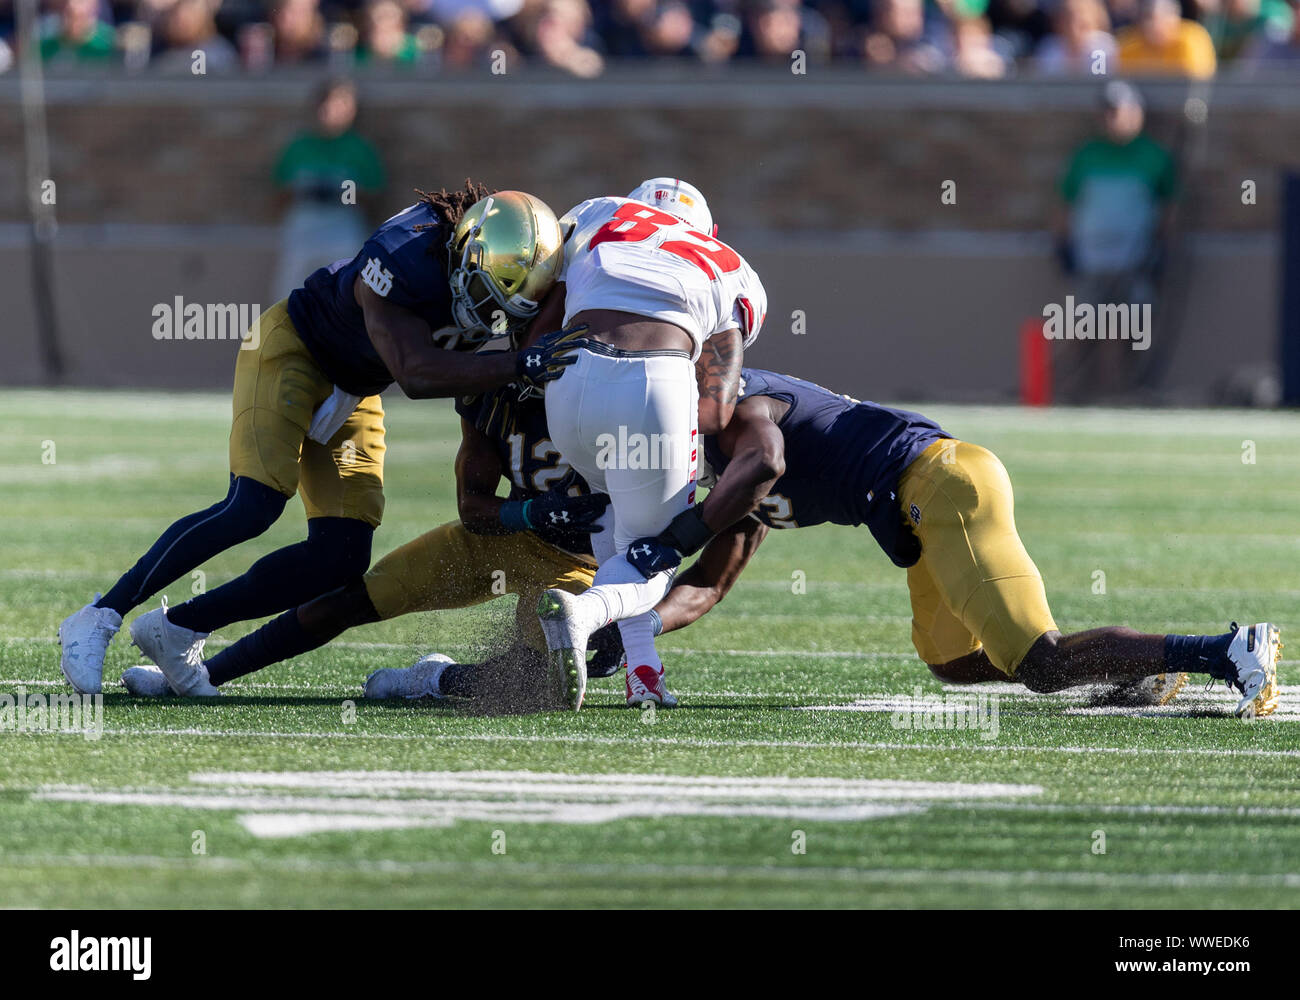 South Bend, Indiana, USA. 14th Sep, 2019. New Mexico tight end Jeffrey Jone Jr. (82) runs with the ball as Notre Dame defenders make the tackle during NCAA football game action between the New Mexico Lobos and the Notre Dame Fighting Irish at Notre Dame Stadium in South Bend, Indiana. Notre Dame defeated New Mexico 66-14. John Mersits/CSM/Alamy Live News Stock Photo